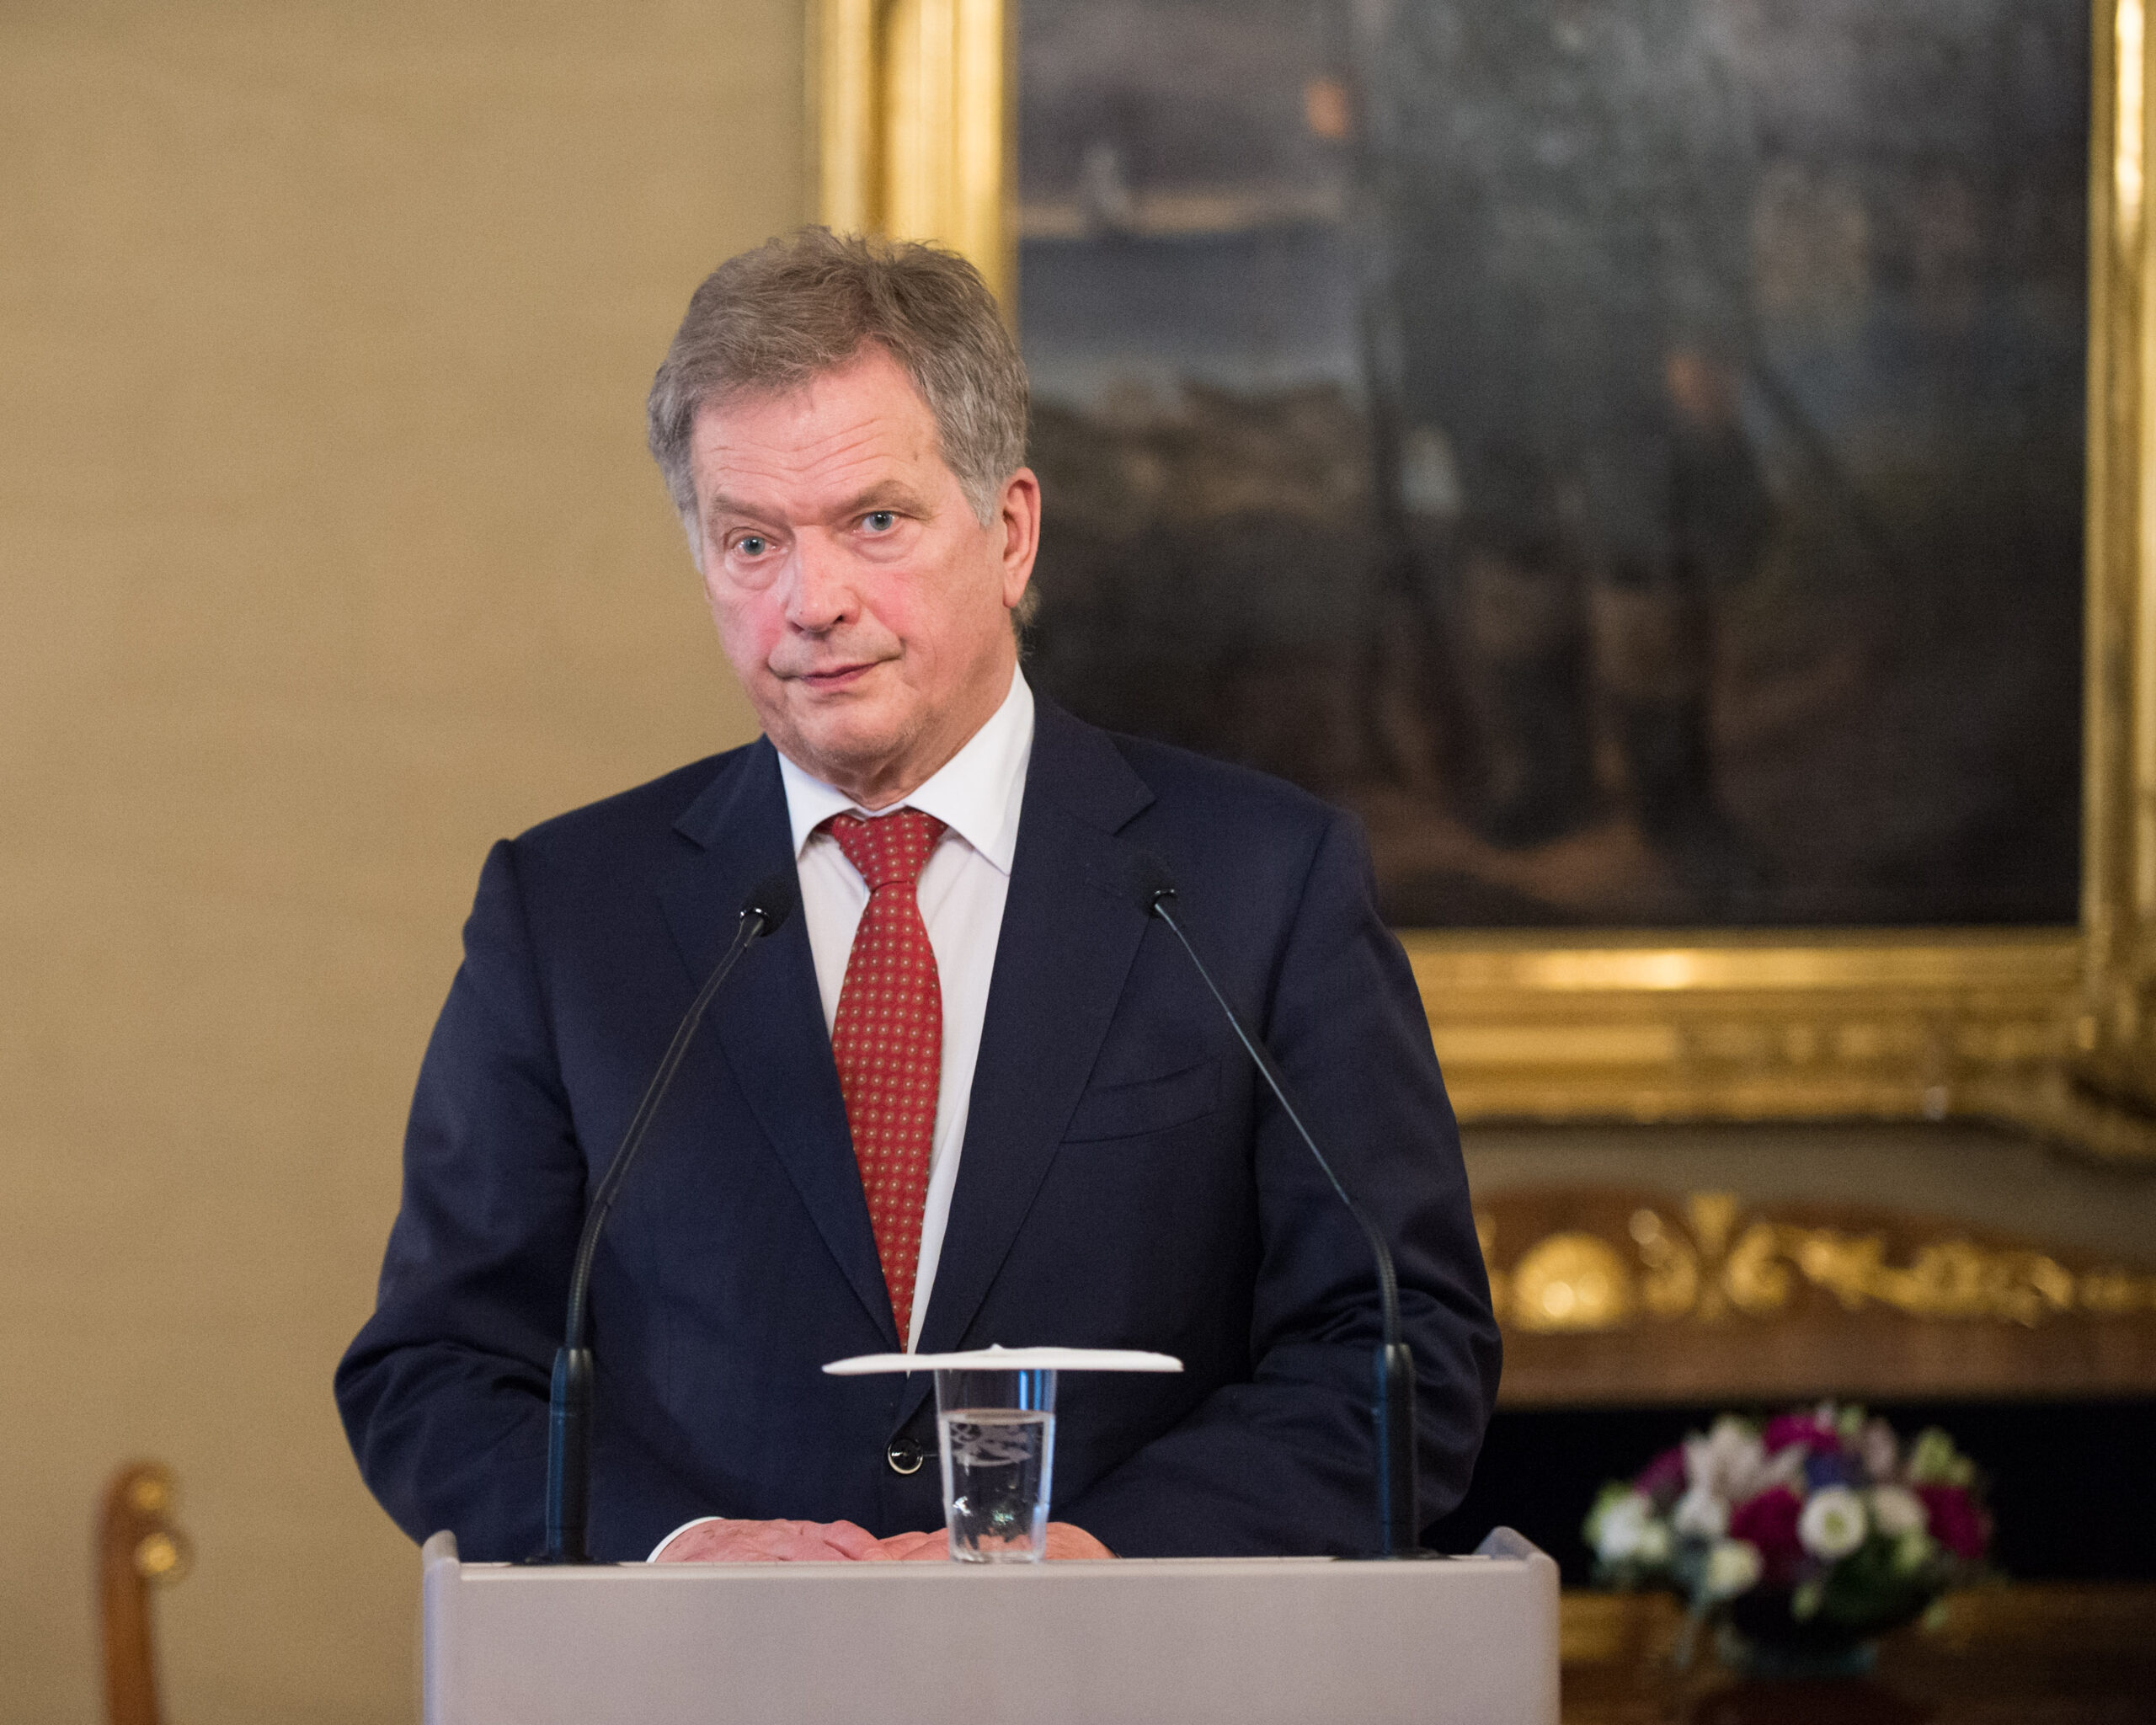 Finland's President was astonished by Turkey's stance